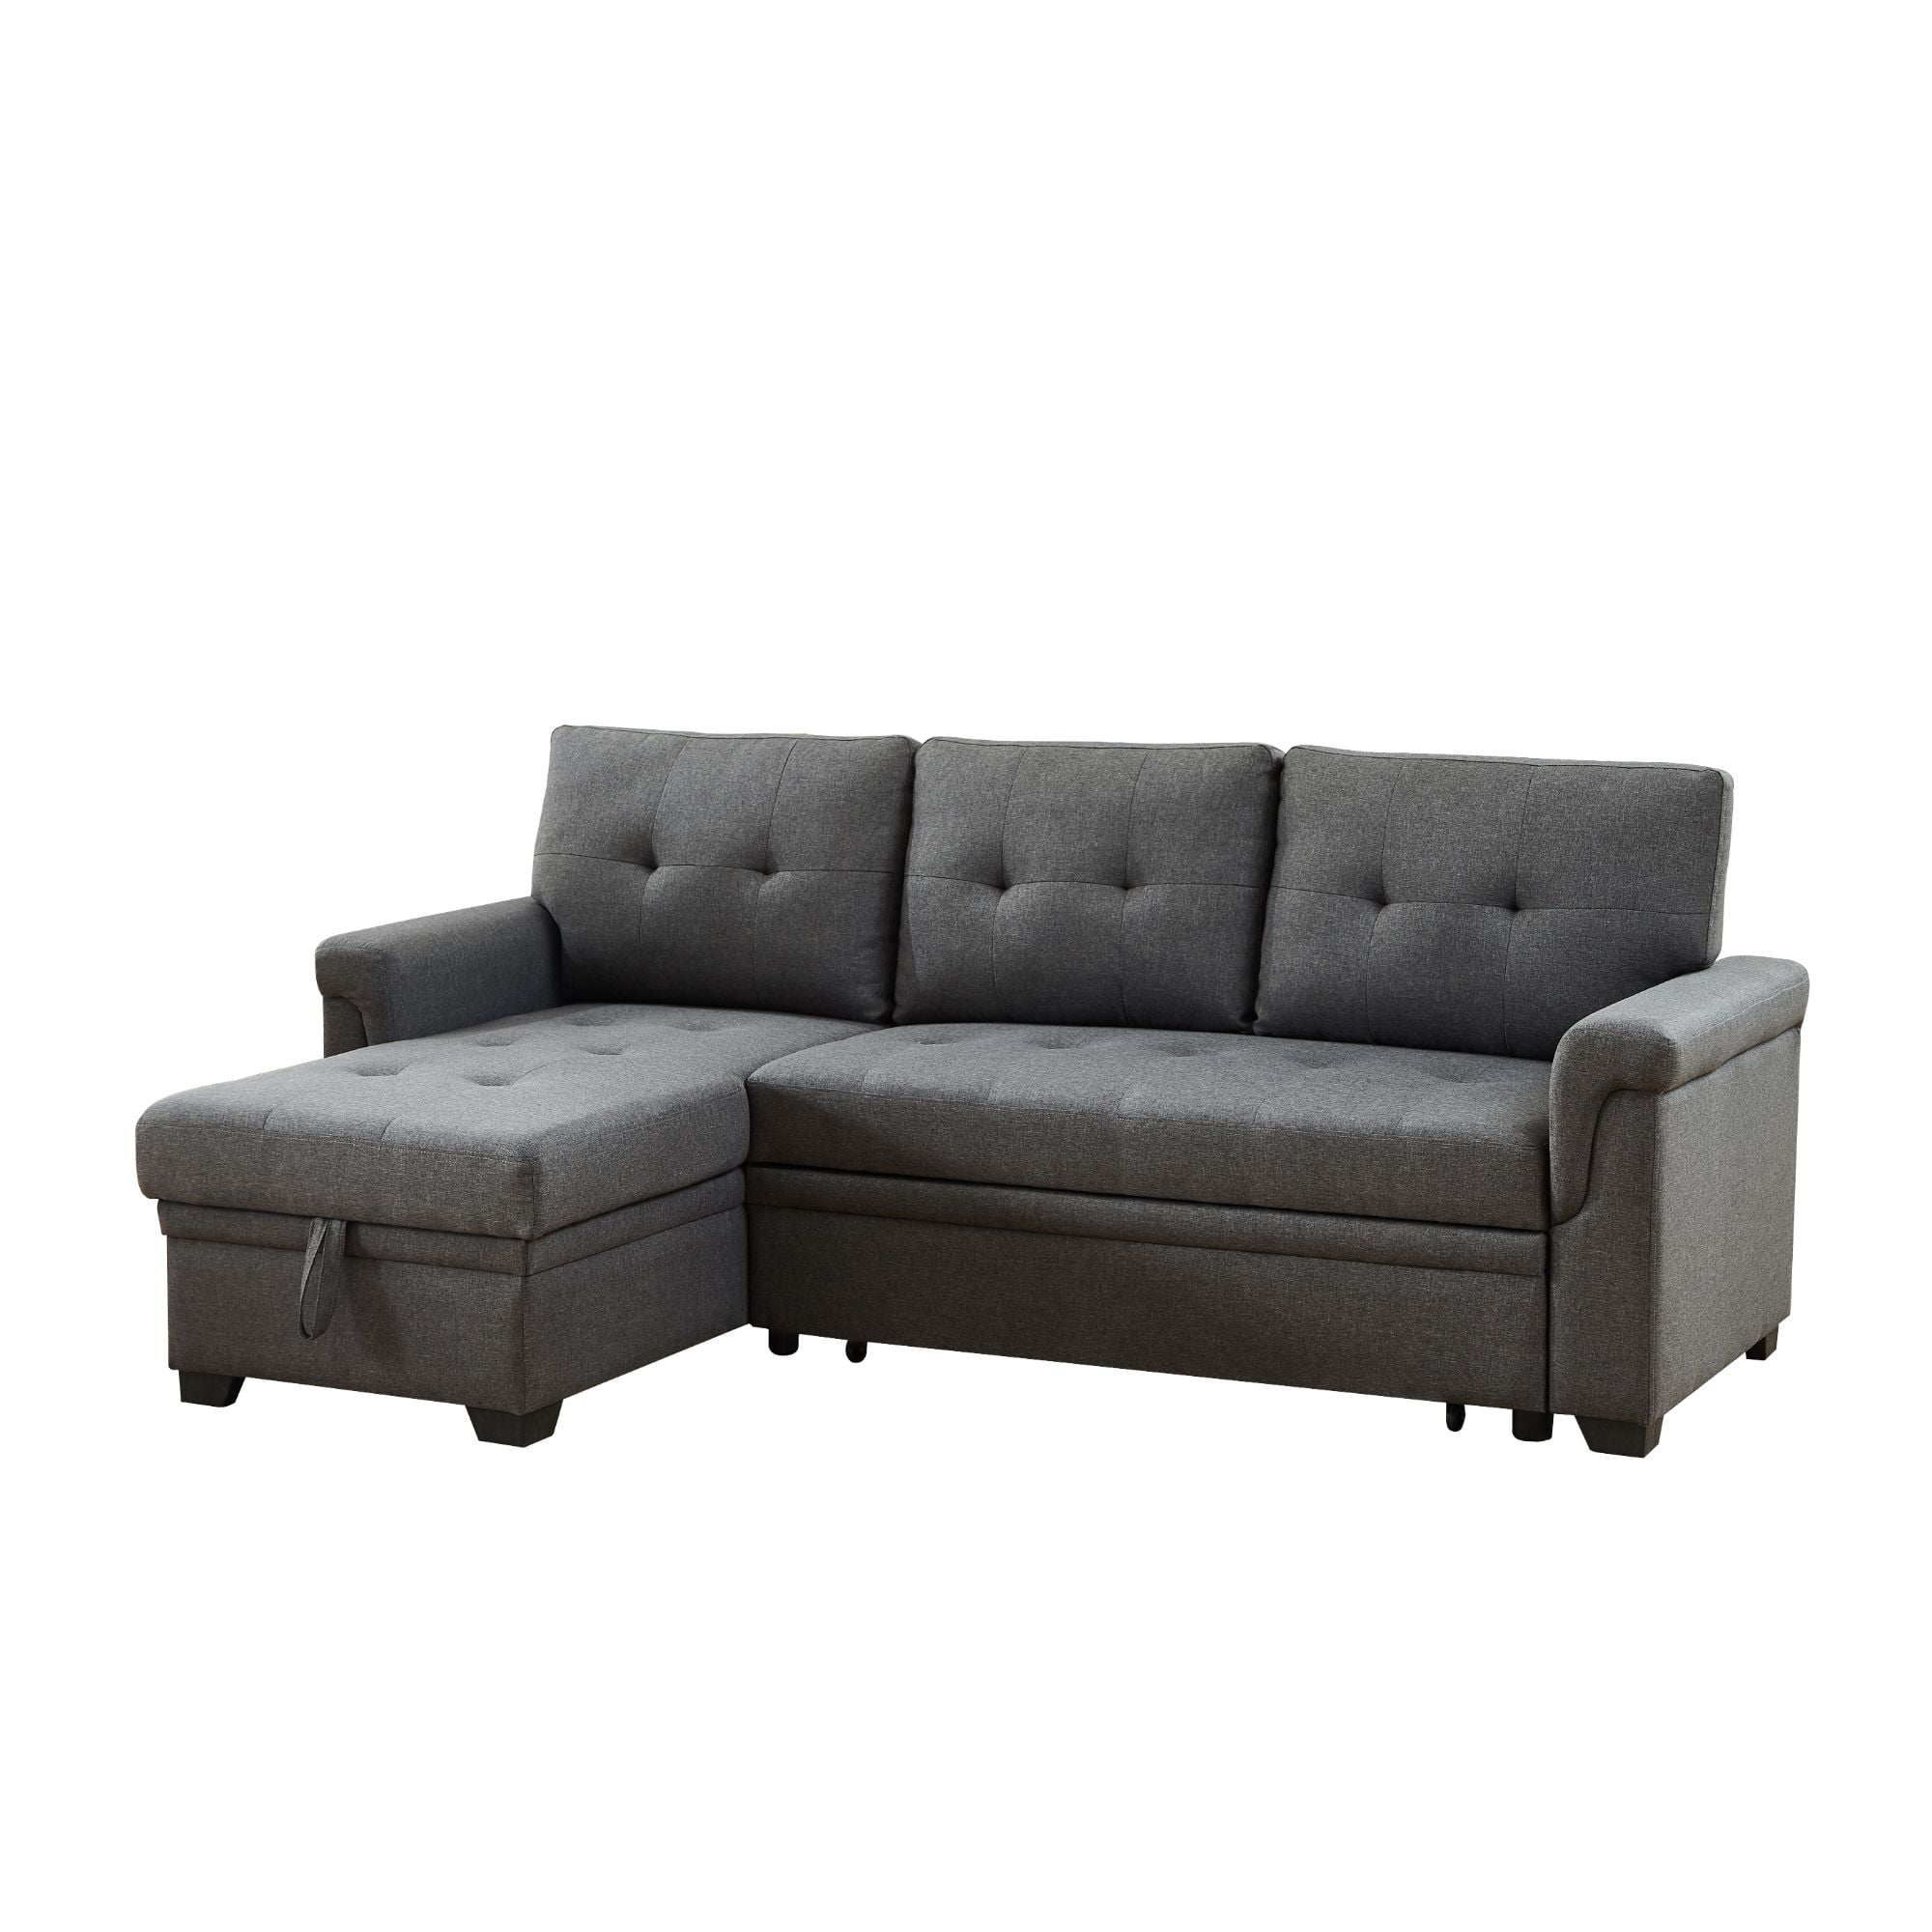 86 Lucca Gray Linen Reversible Sleeper, Leather Sleeper Sectional With Chaise